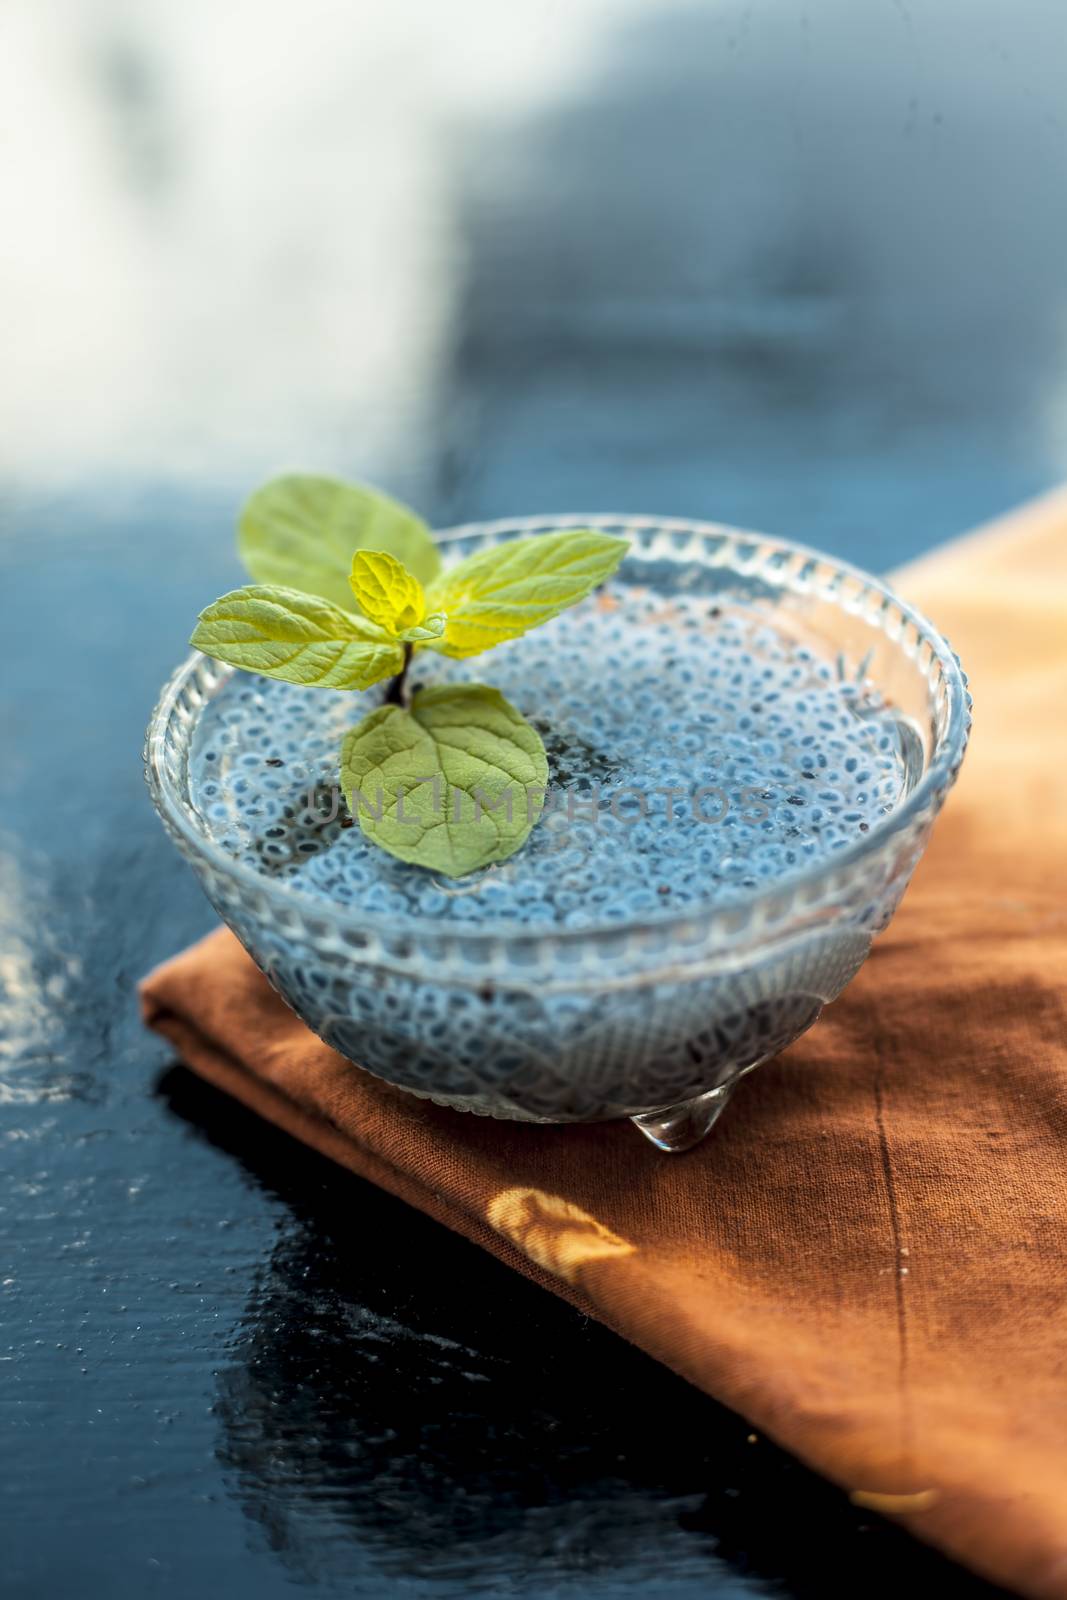 Close up of soaked sabja seeds or falooda seeds or sweet basil seeds in a glass bowl on brown colored napkin on wooden surface with some mint leaves in it.Used in many flavored beverages.